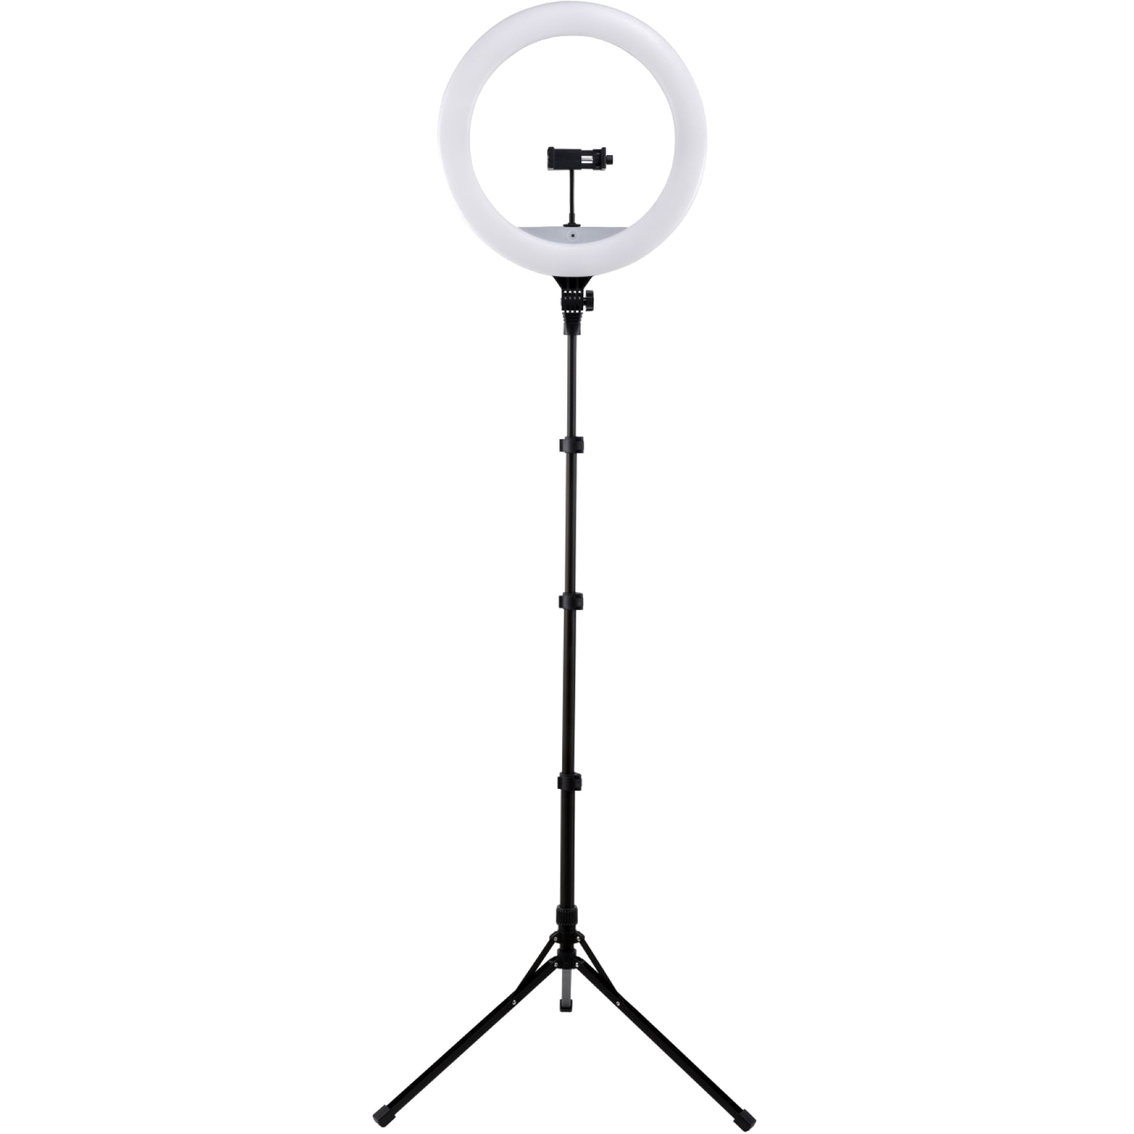 Vivitar 18 in. Ring Light Video Light Kit with 63 in. Stand and Remote - Image 5 of 10